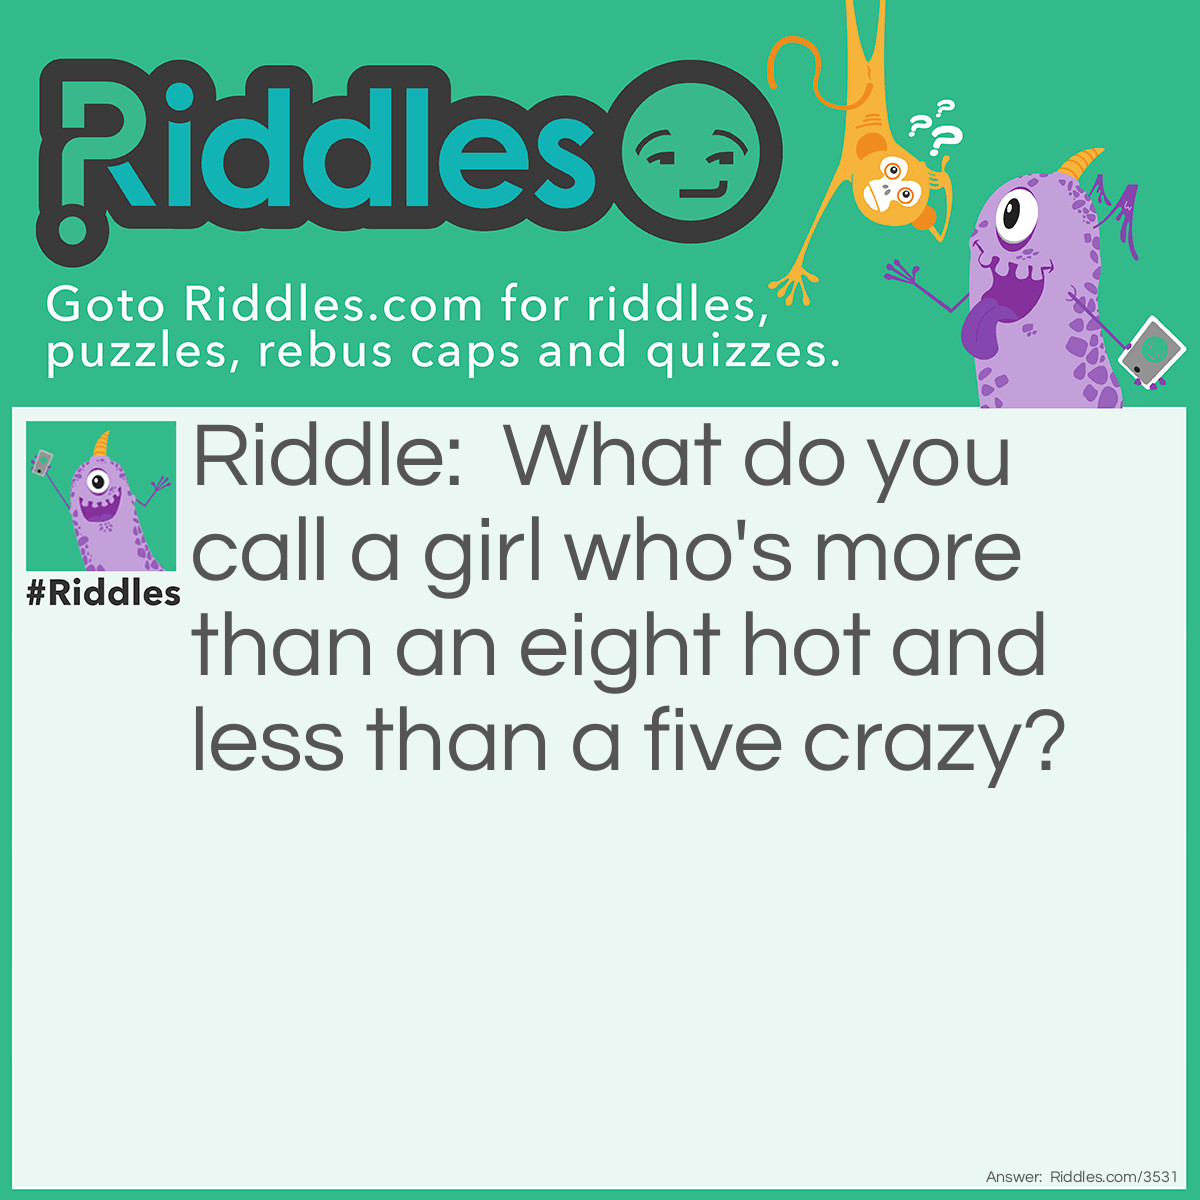 Riddle: What do you call a girl who's more than an eight hot and less than a five crazy? Answer: A unicorn because they don't exist.